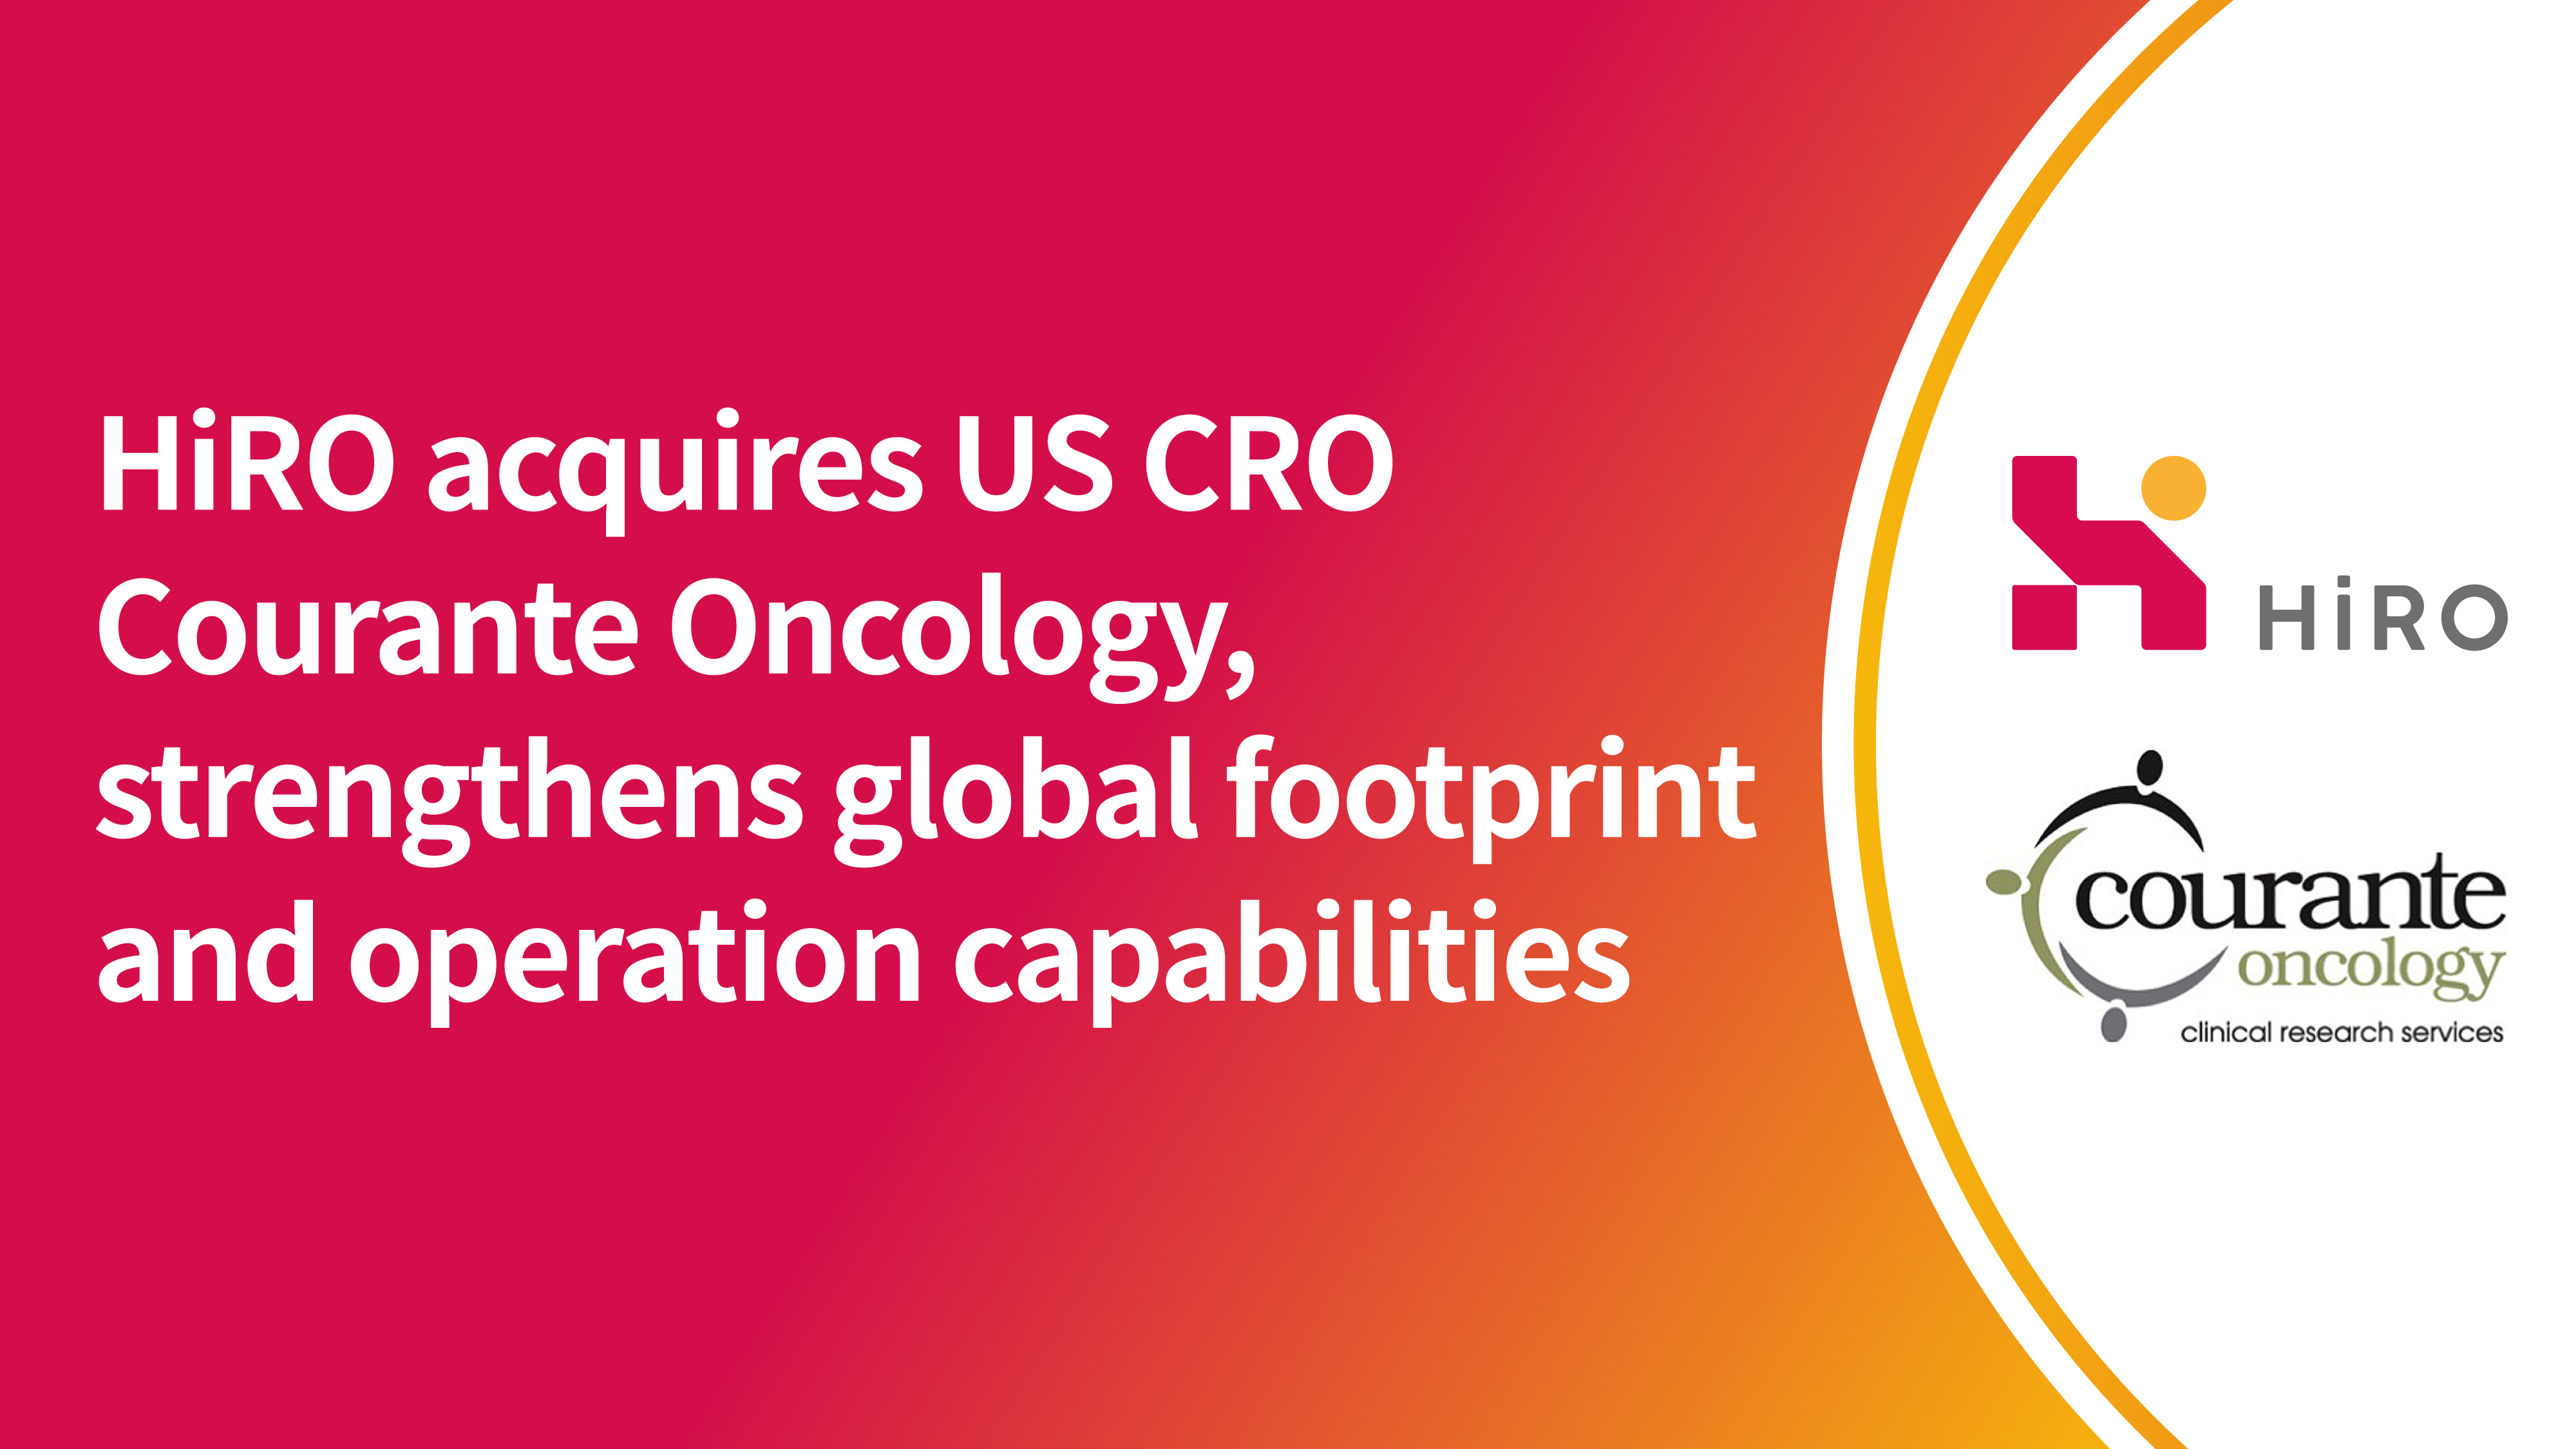 HiRO Acquires US CRO Courante Oncology,  Strengthens Global Footprint and Operation Capabilities